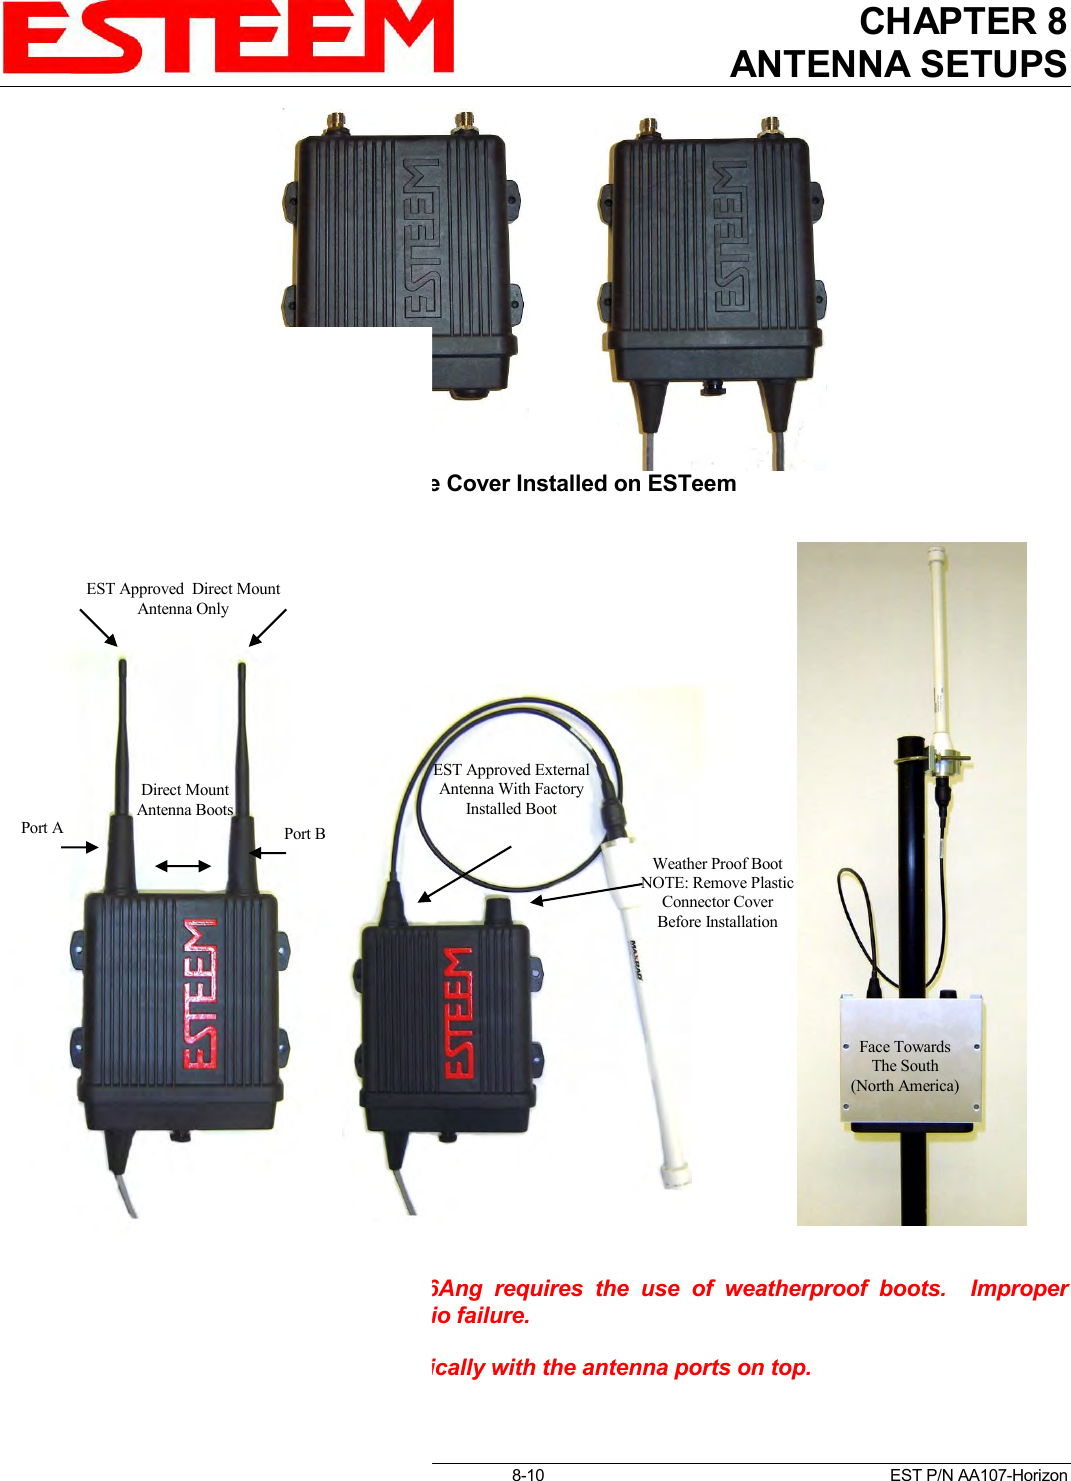 CHAPTER 8 ANTENNA SETUPS   Revised: 10 Mar 16  8-10   EST P/N AA107-Horizon                  Caution:  Outdoor  mounting  of  the  216Ang  requires  the  use  of  weatherproof  boots.    Improper installation could result in radio failure.  Caution: Always mount the 216Ang vertically with the antenna ports on top.                           Figure 12: Face Plate Cover Installed on ESTeem                               Figure 13: Completed AA195PM Mounts   Direct Mount Antenna Boots Port A EST Approved  Direct Mount Antenna Only Port B EST Approved External Antenna With Factory Installed Boot Weather Proof Boot NOTE: Remove Plastic Connector Cover Before Installation Face Towards The South (North America) 